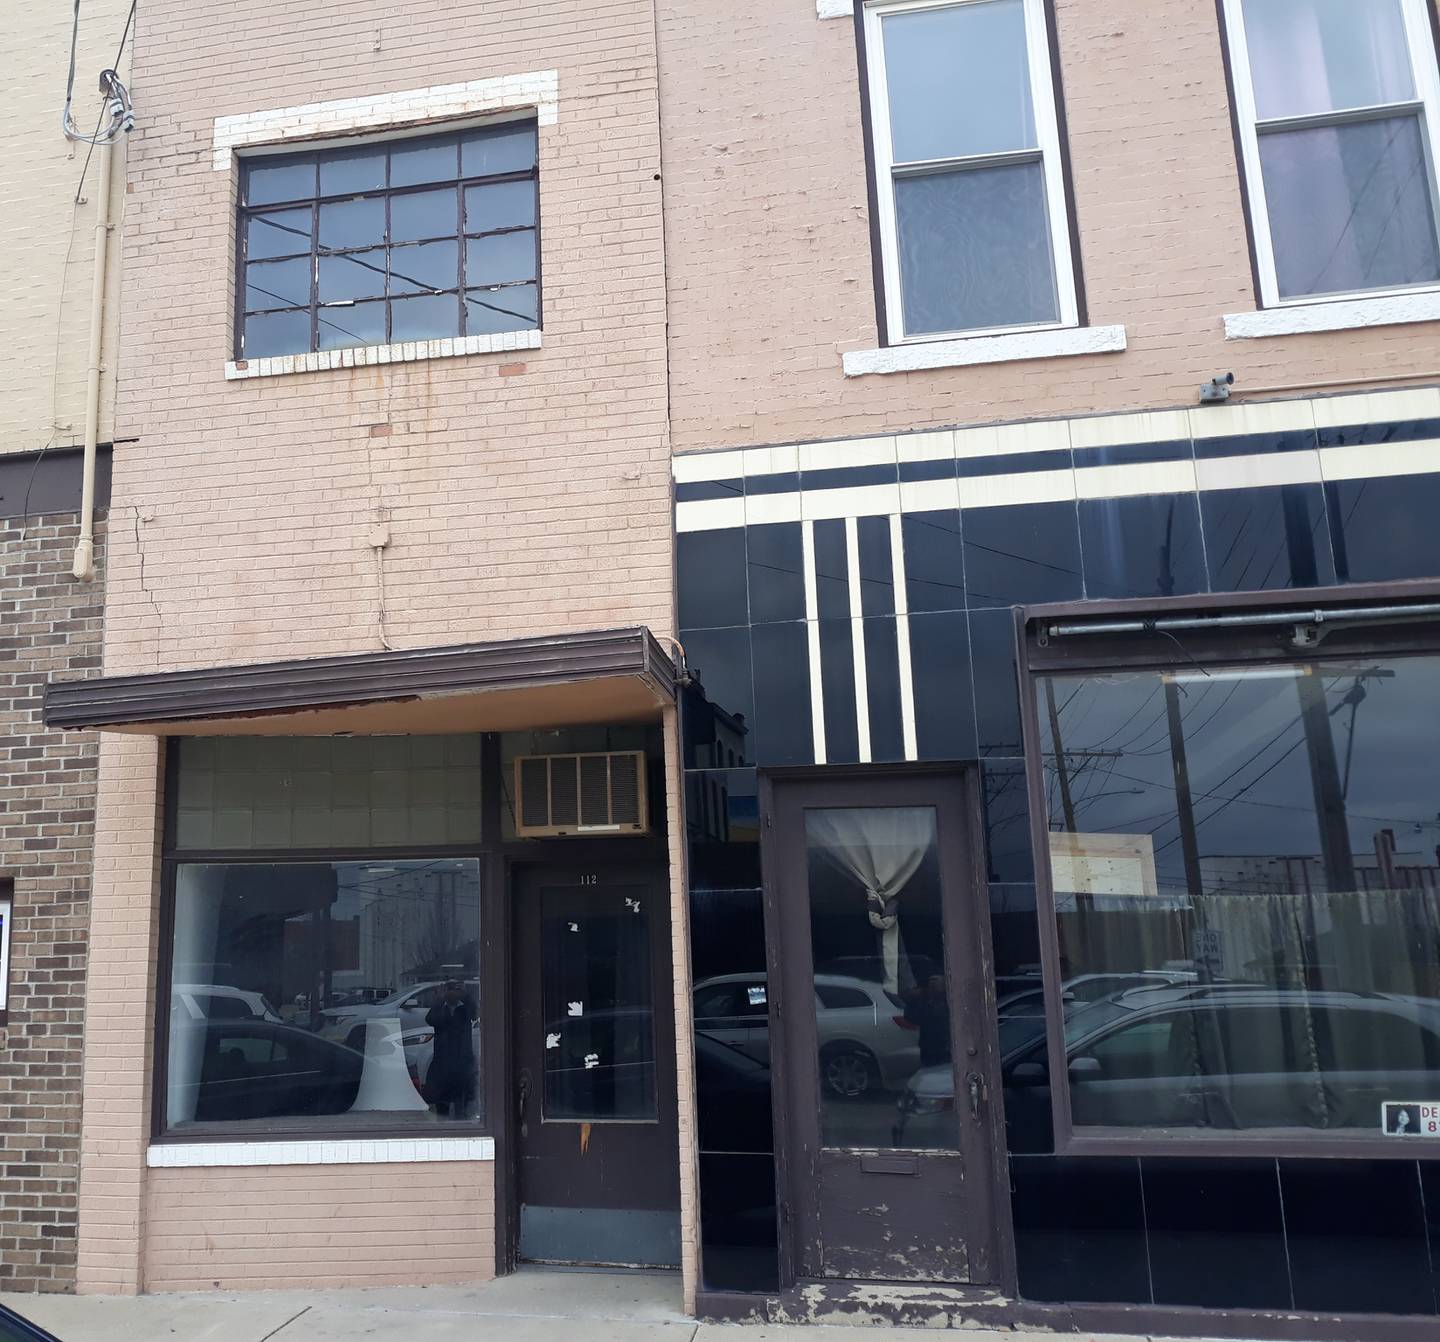 The Plan Commission unanimously recommended a facade grant for 112 N. Monroe St. (the building on the left) to install a new second-story window, rebrick the east facade, replace the east facade doorway, the first-floor window and the existing awning totaling about $24,000 in improvements.